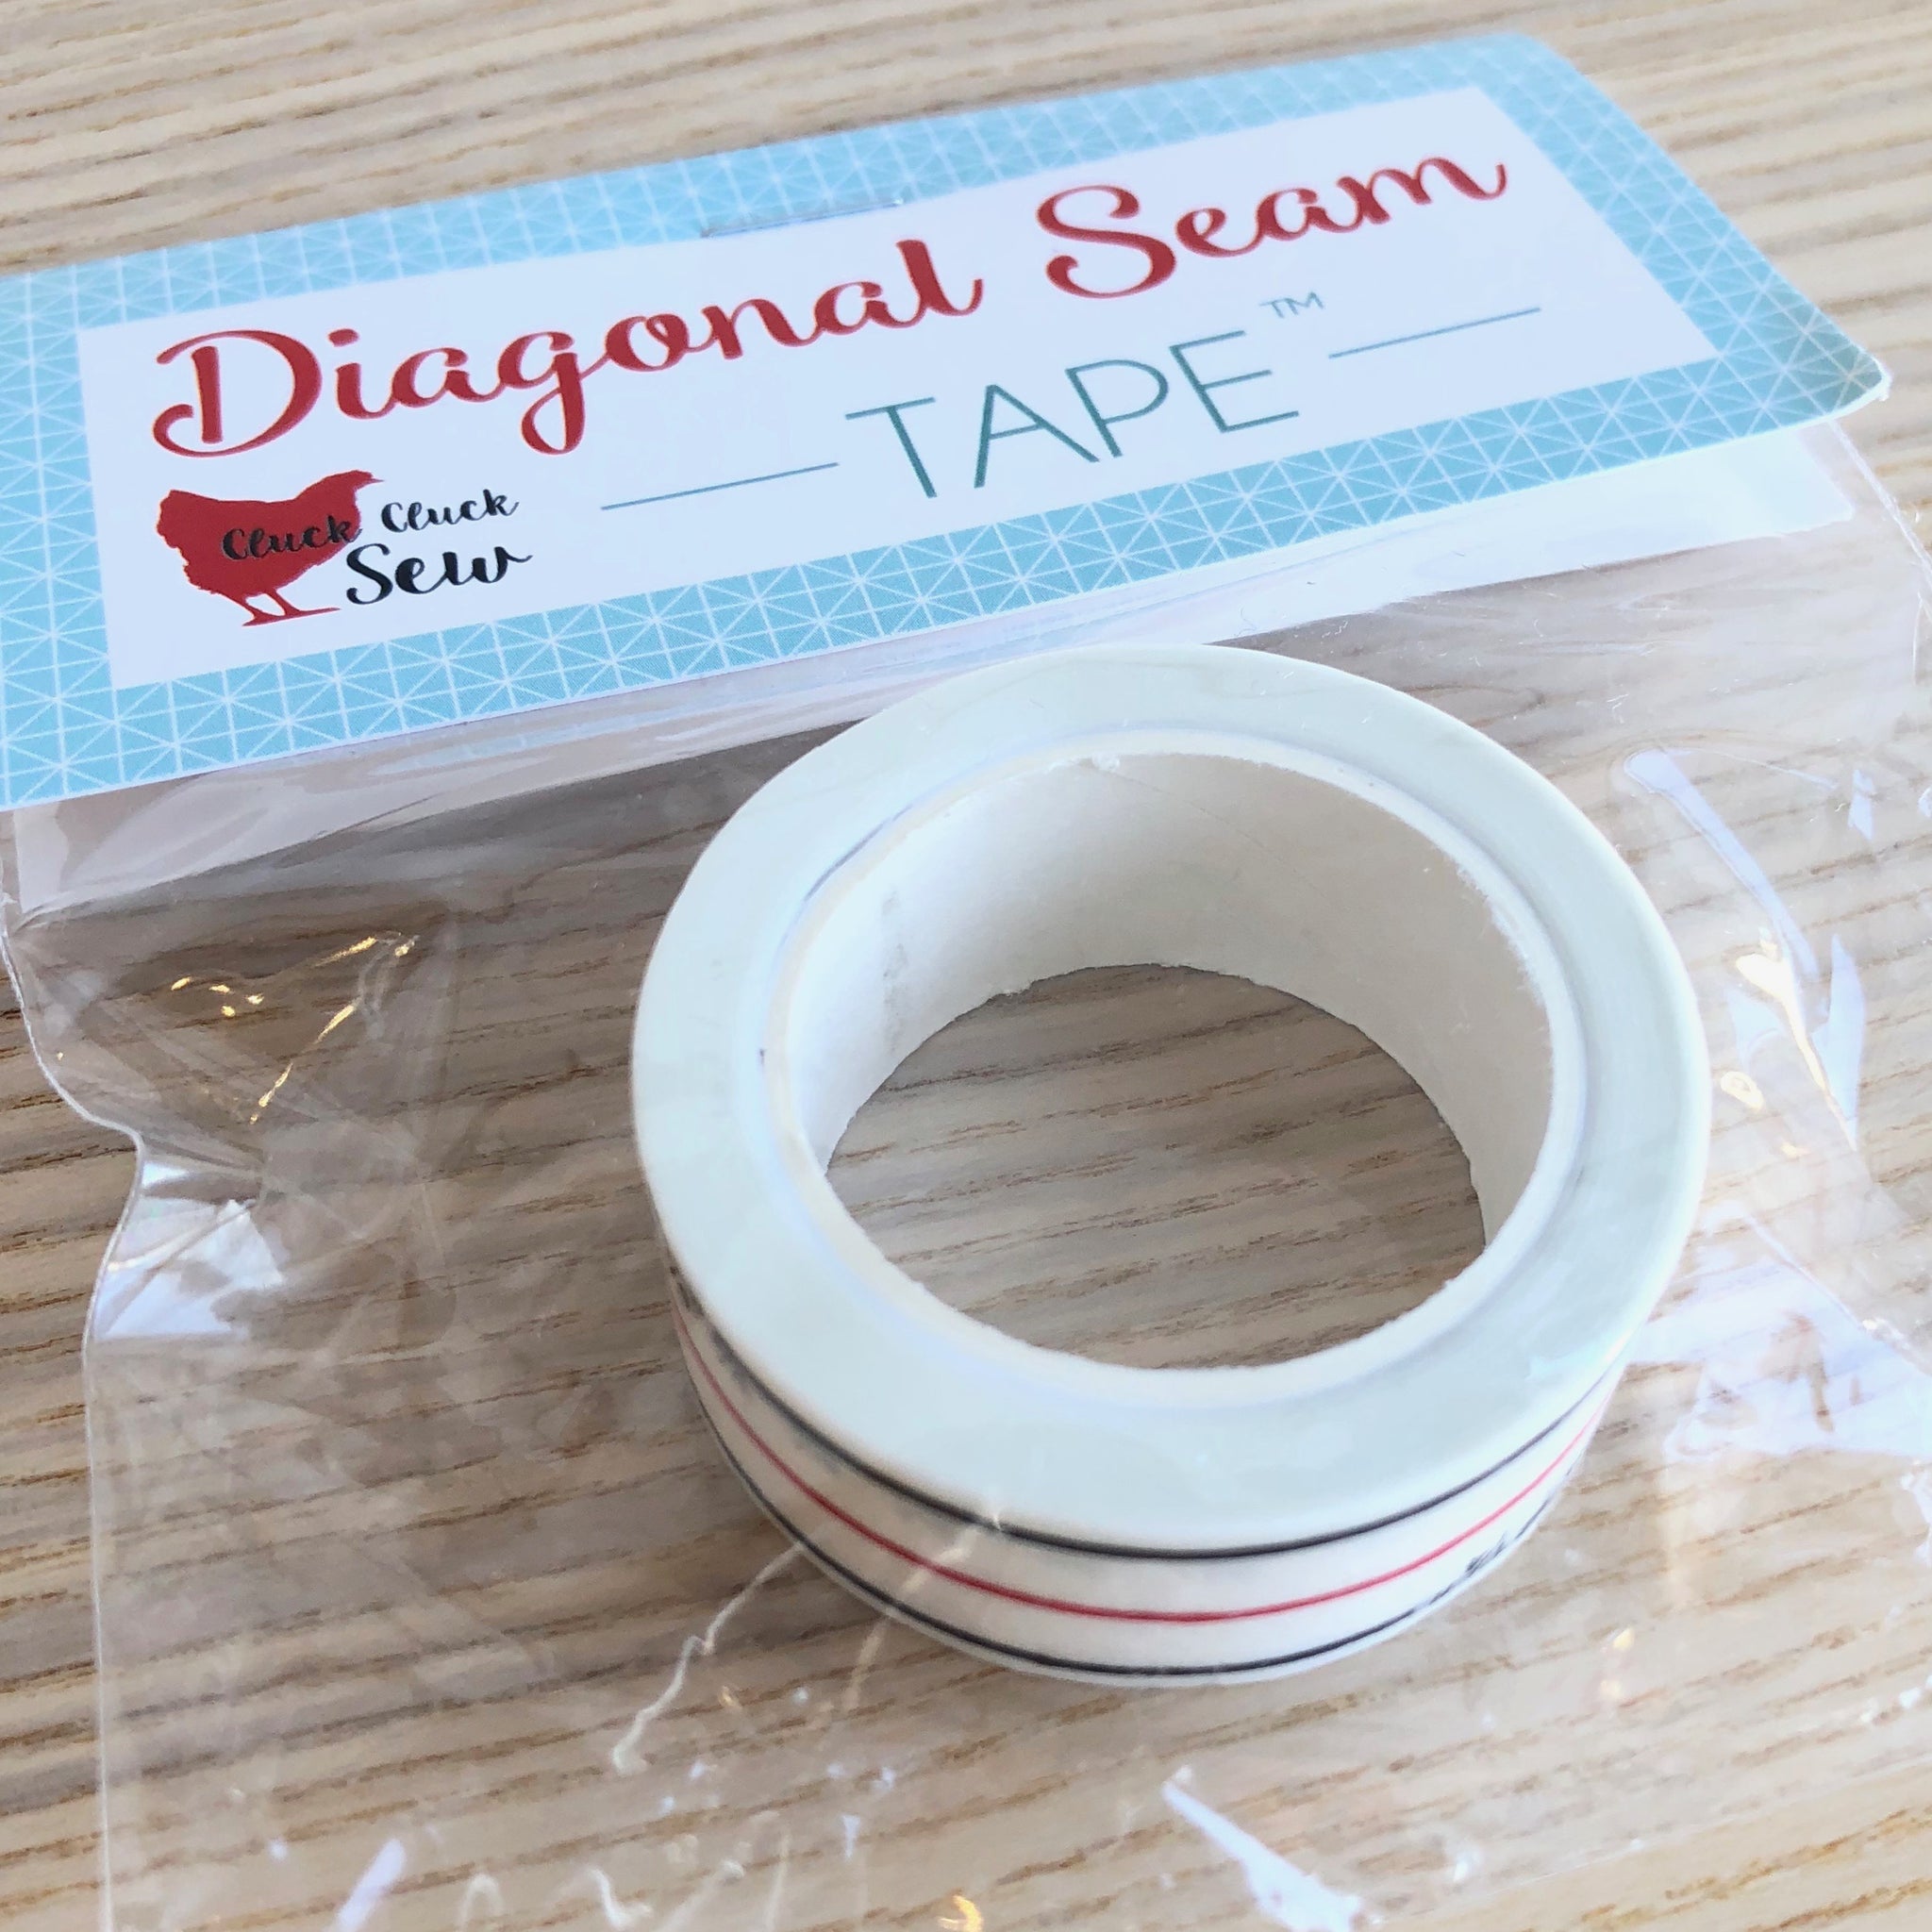 Check out the Diagonal Seam Tape!